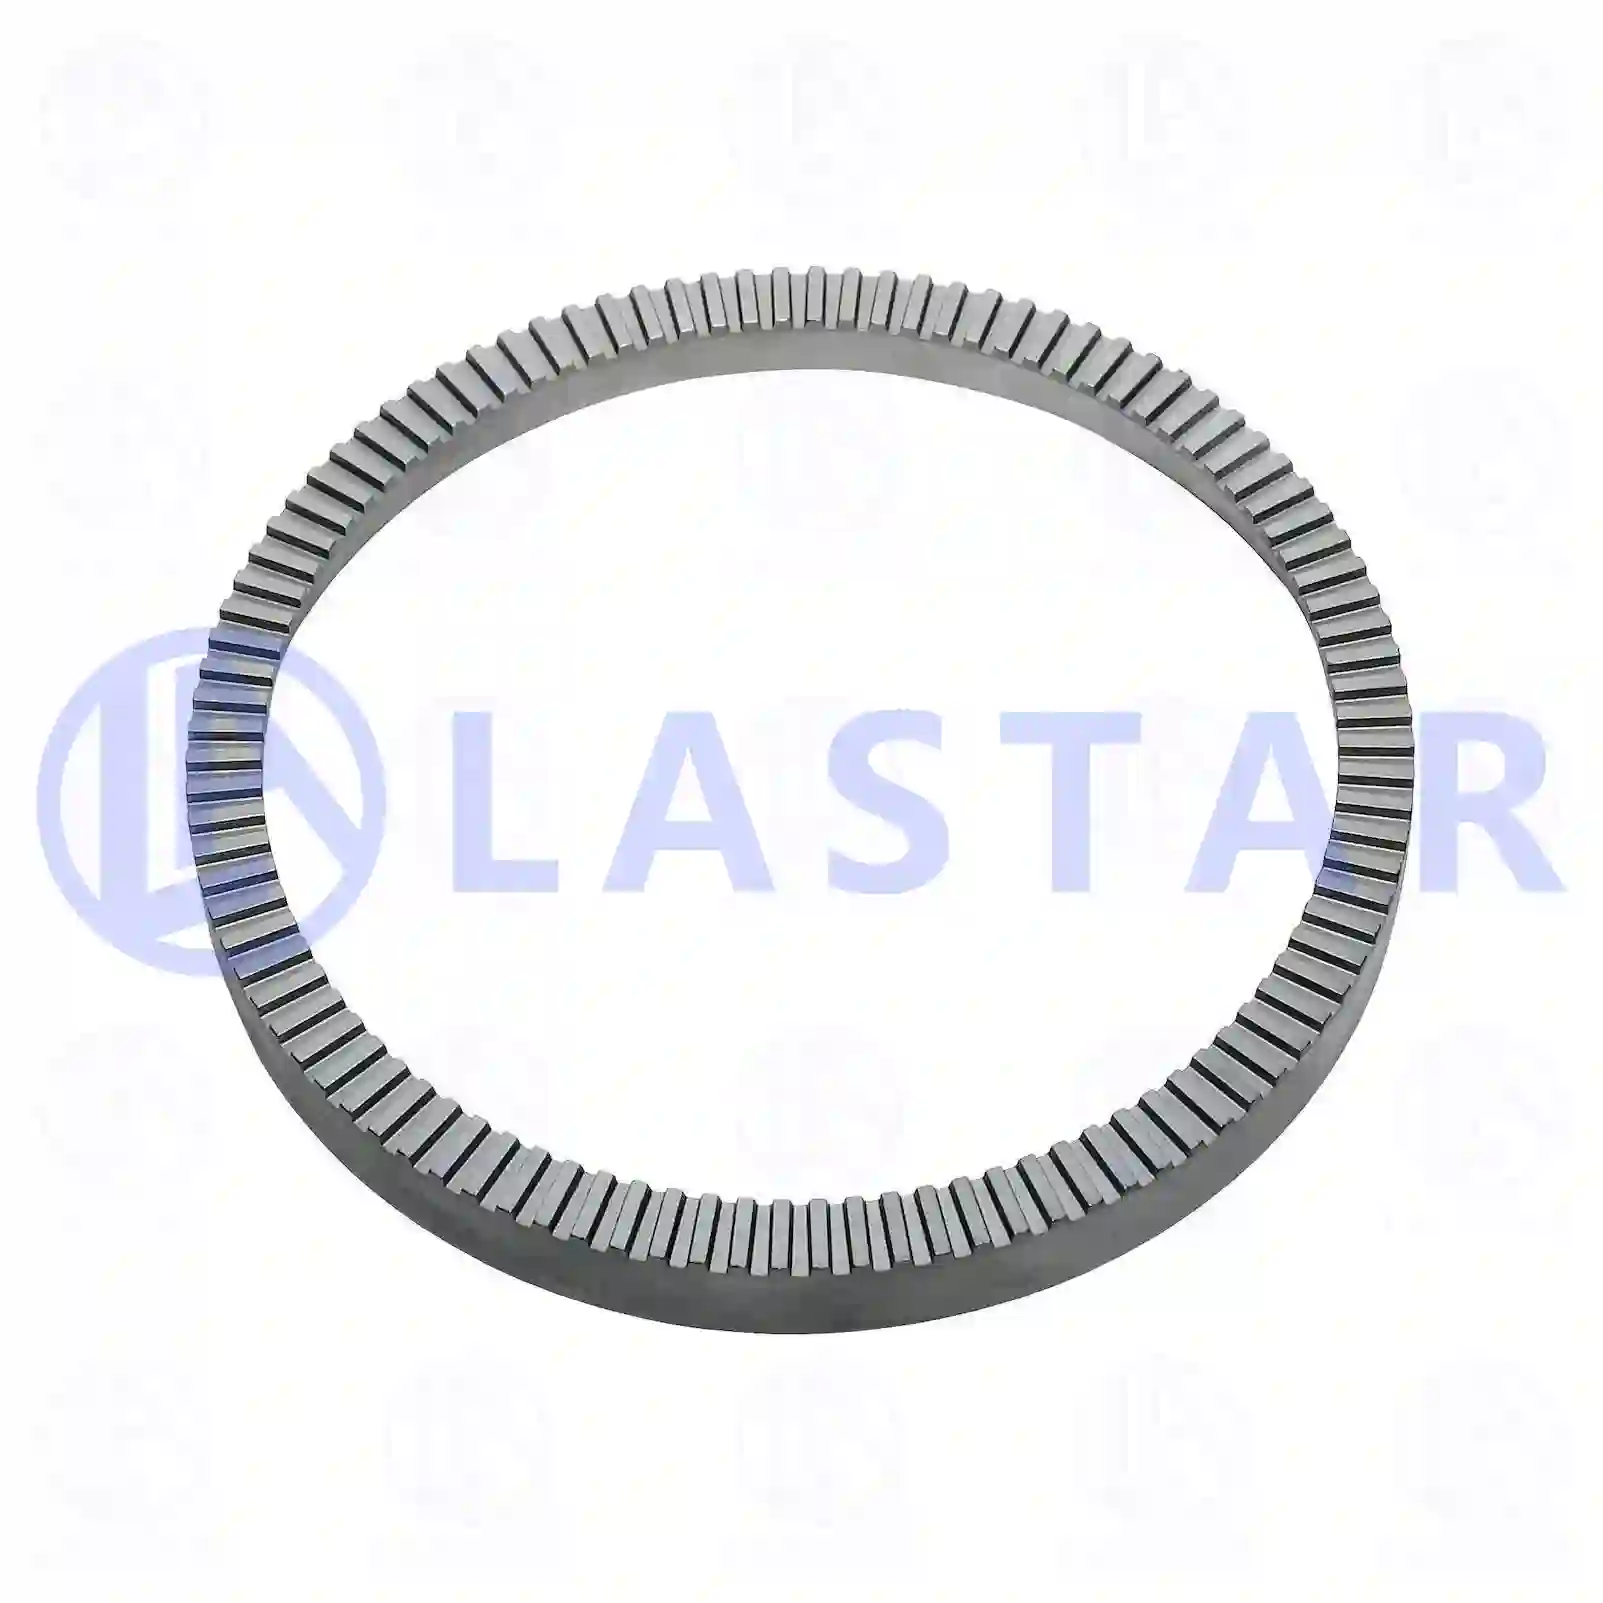 ABS ring, 77726121, 3853560115, 3855420317, ZG50011-0008 ||  77726121 Lastar Spare Part | Truck Spare Parts, Auotomotive Spare Parts ABS ring, 77726121, 3853560115, 3855420317, ZG50011-0008 ||  77726121 Lastar Spare Part | Truck Spare Parts, Auotomotive Spare Parts